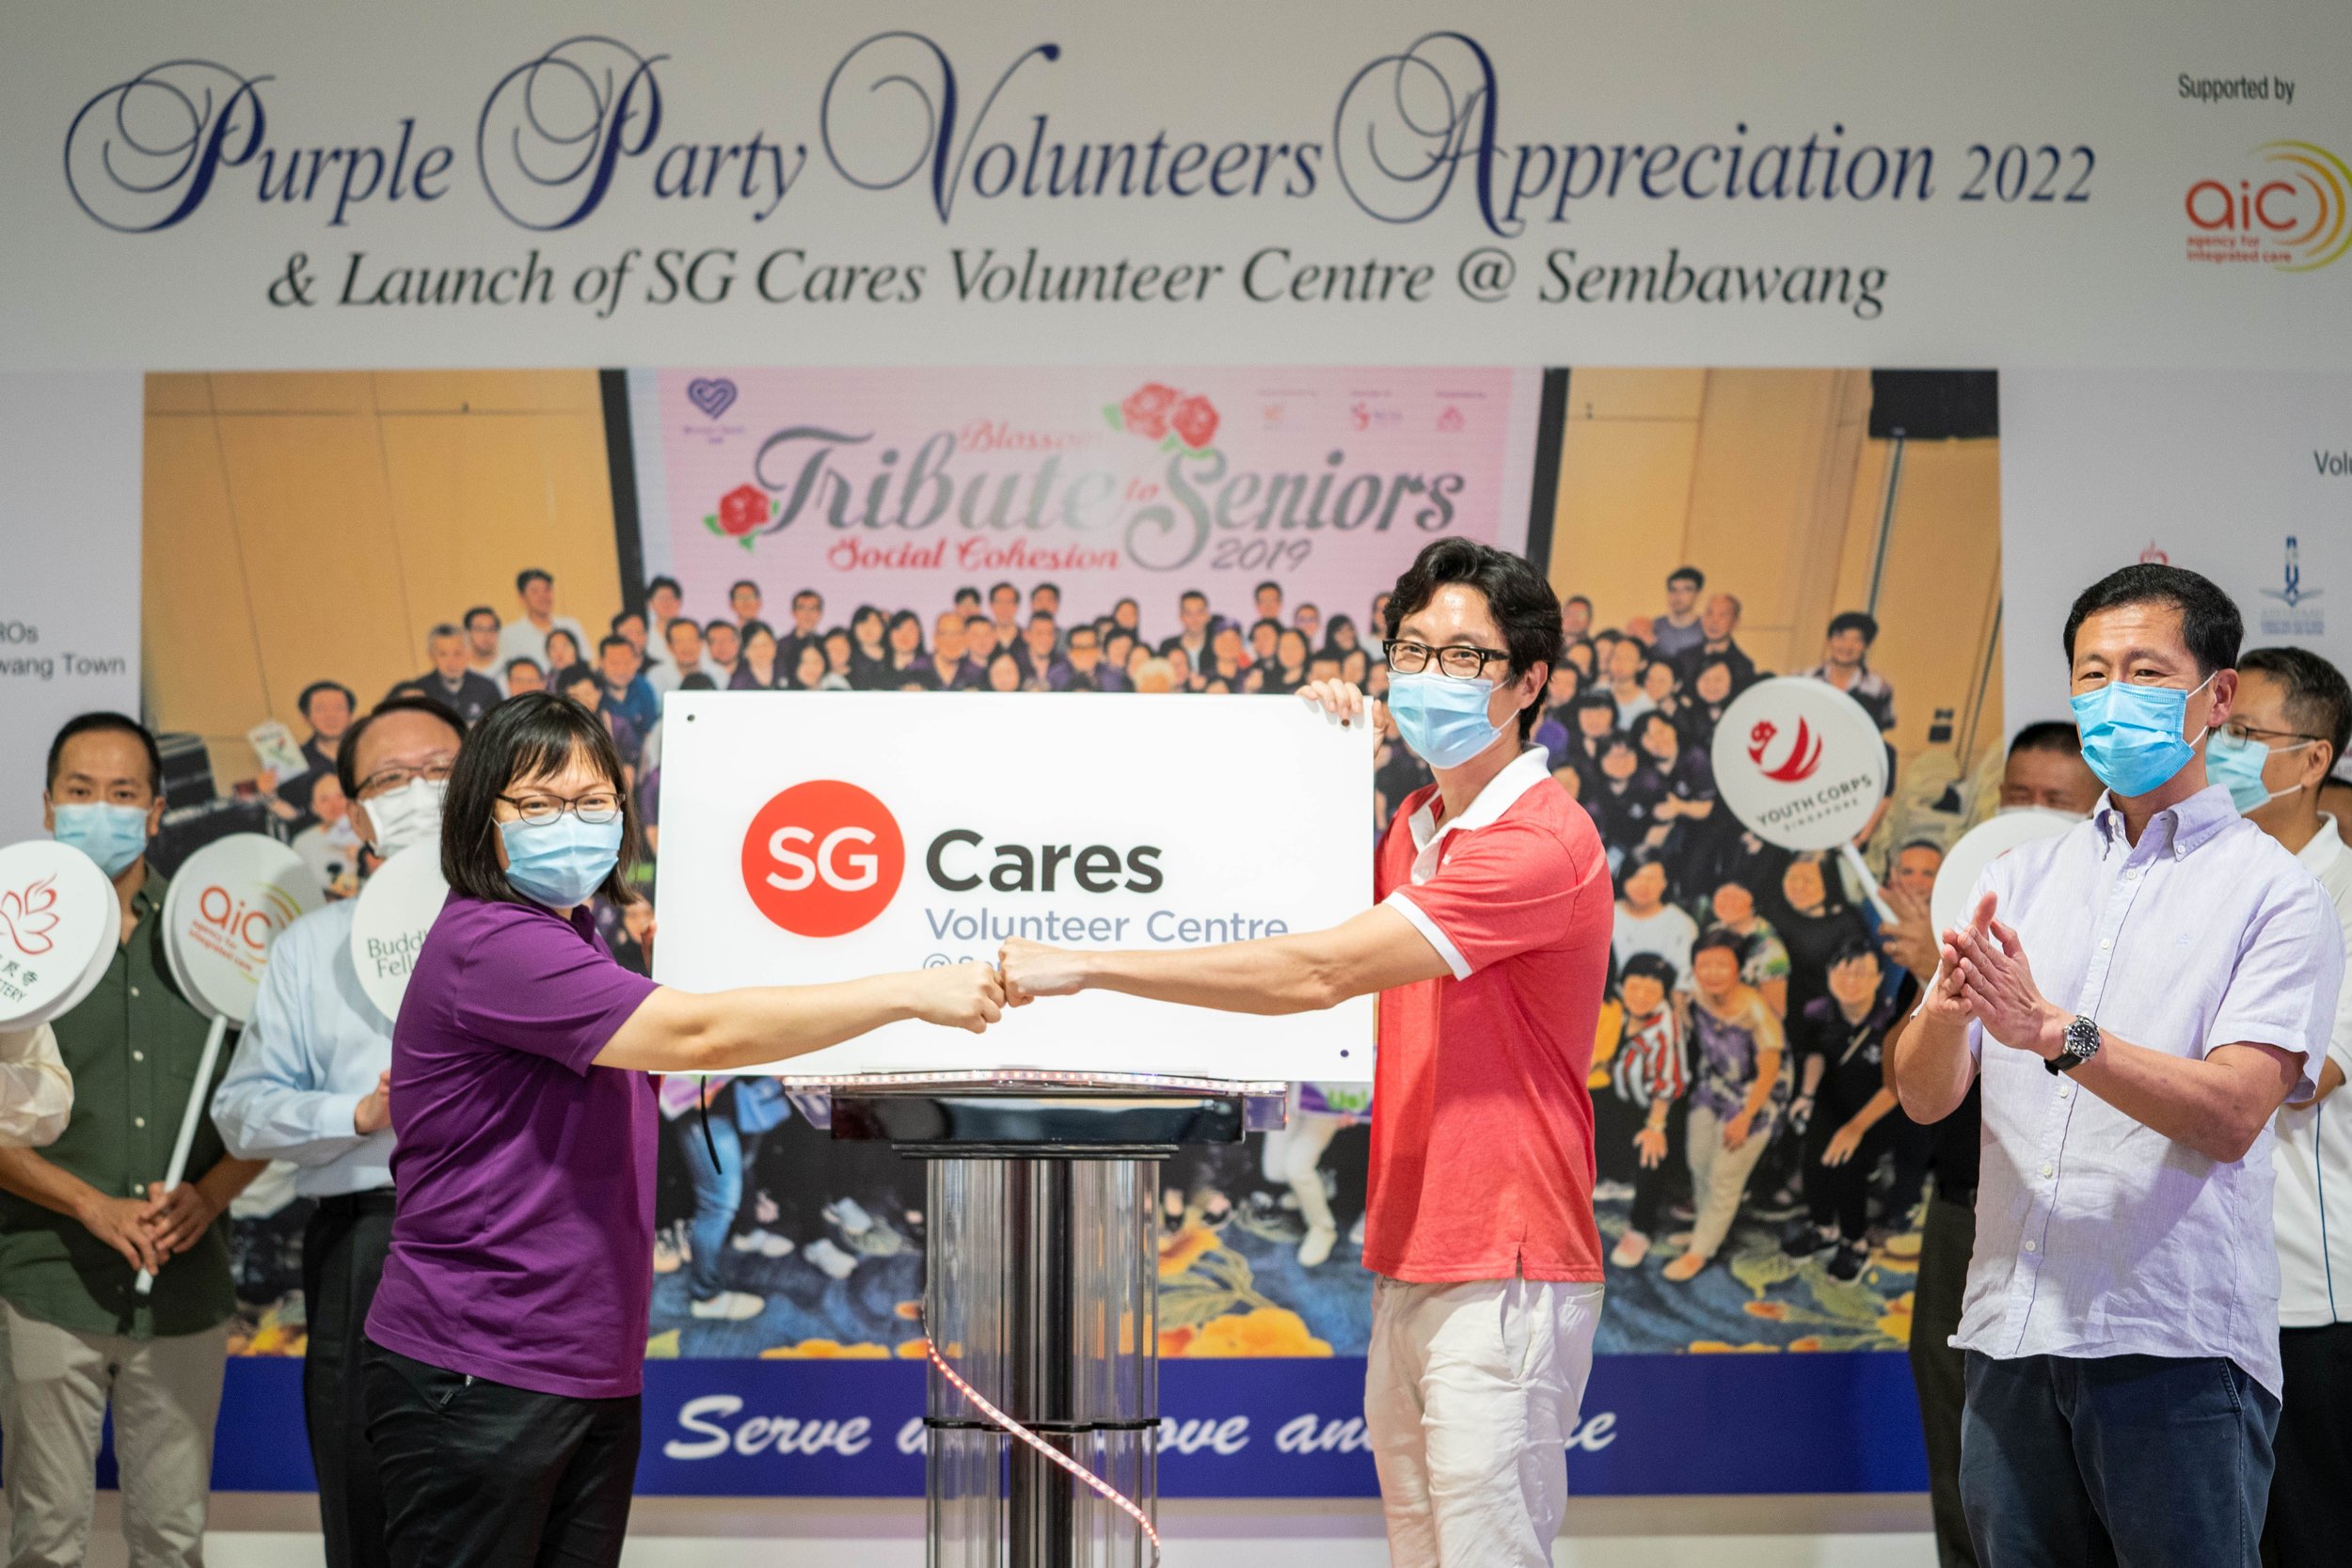 Blossom Seeds Volunteer Appreciation and Launch of SG Cares VC @ Sembawang (6).jpg